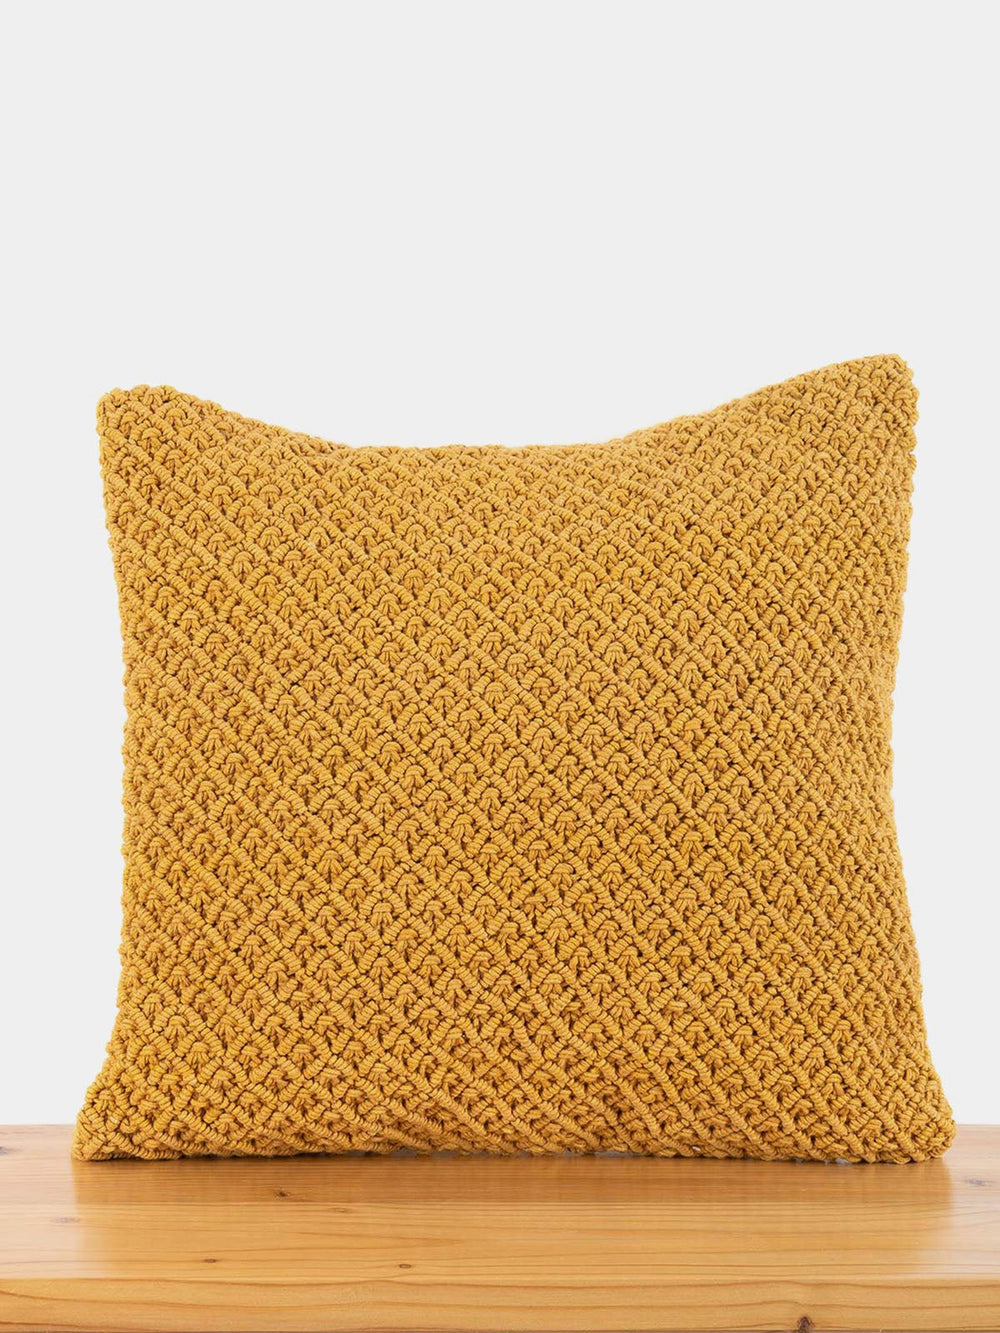 Bed and LivingJewel Hand-Knotted Cushion CoverOne 'O' Eight Knots